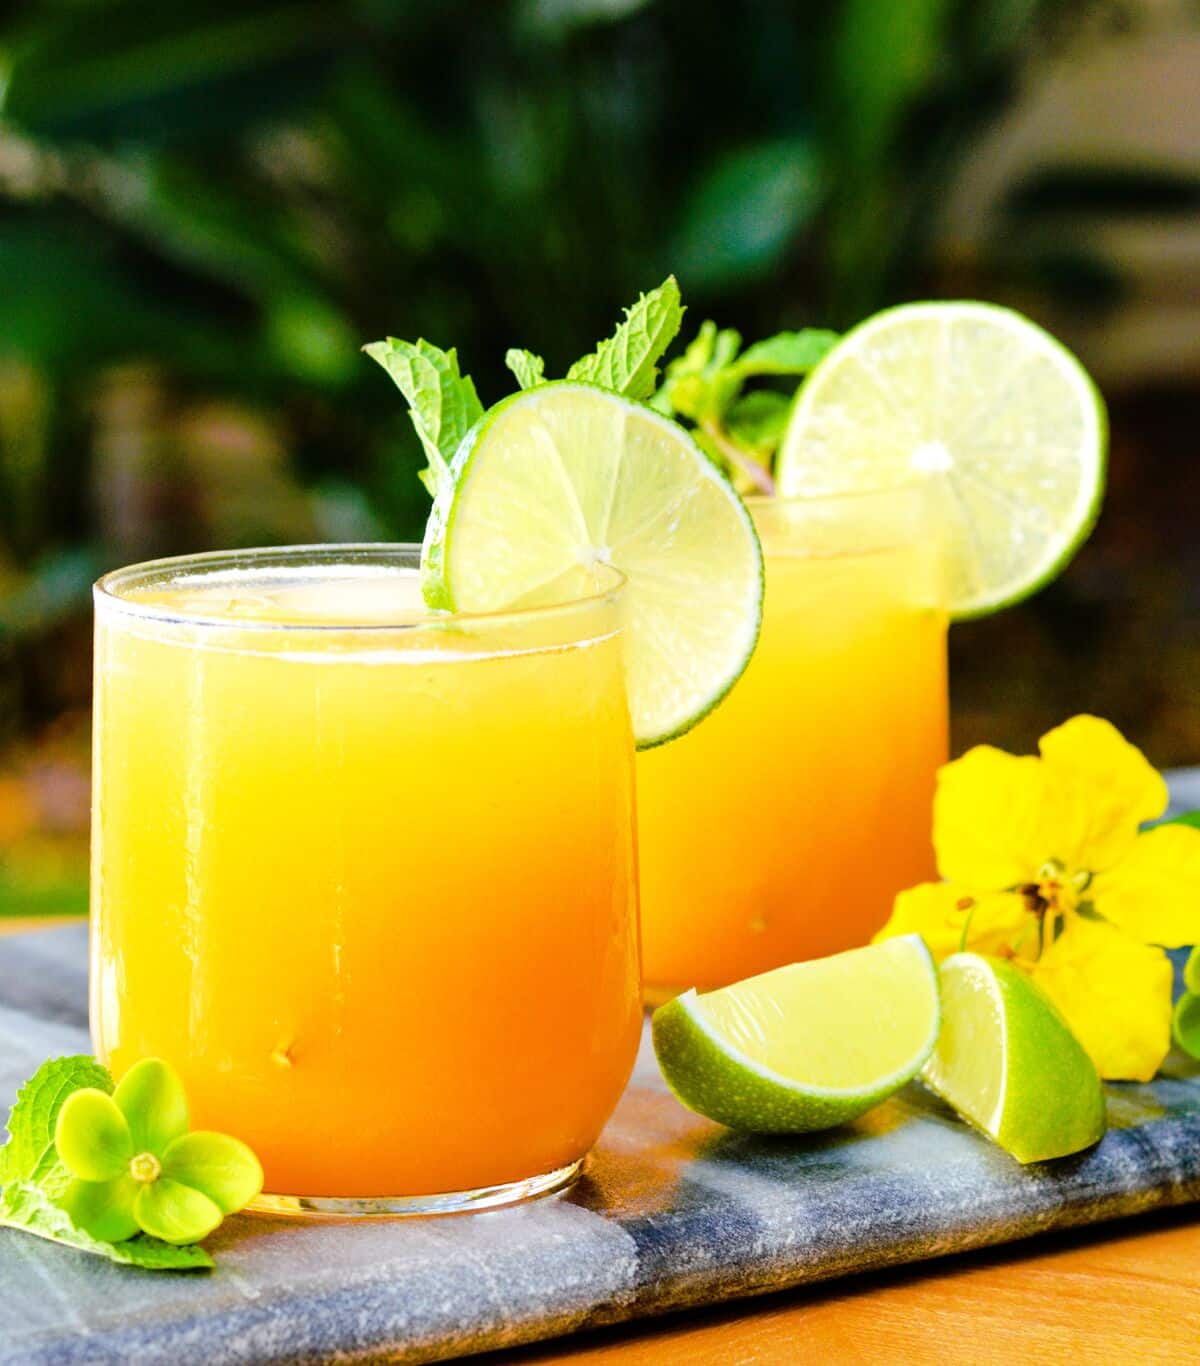 Tropical Mango Fauxjito mocktail and more non-alcoholic drink recipes for your Easter celebration